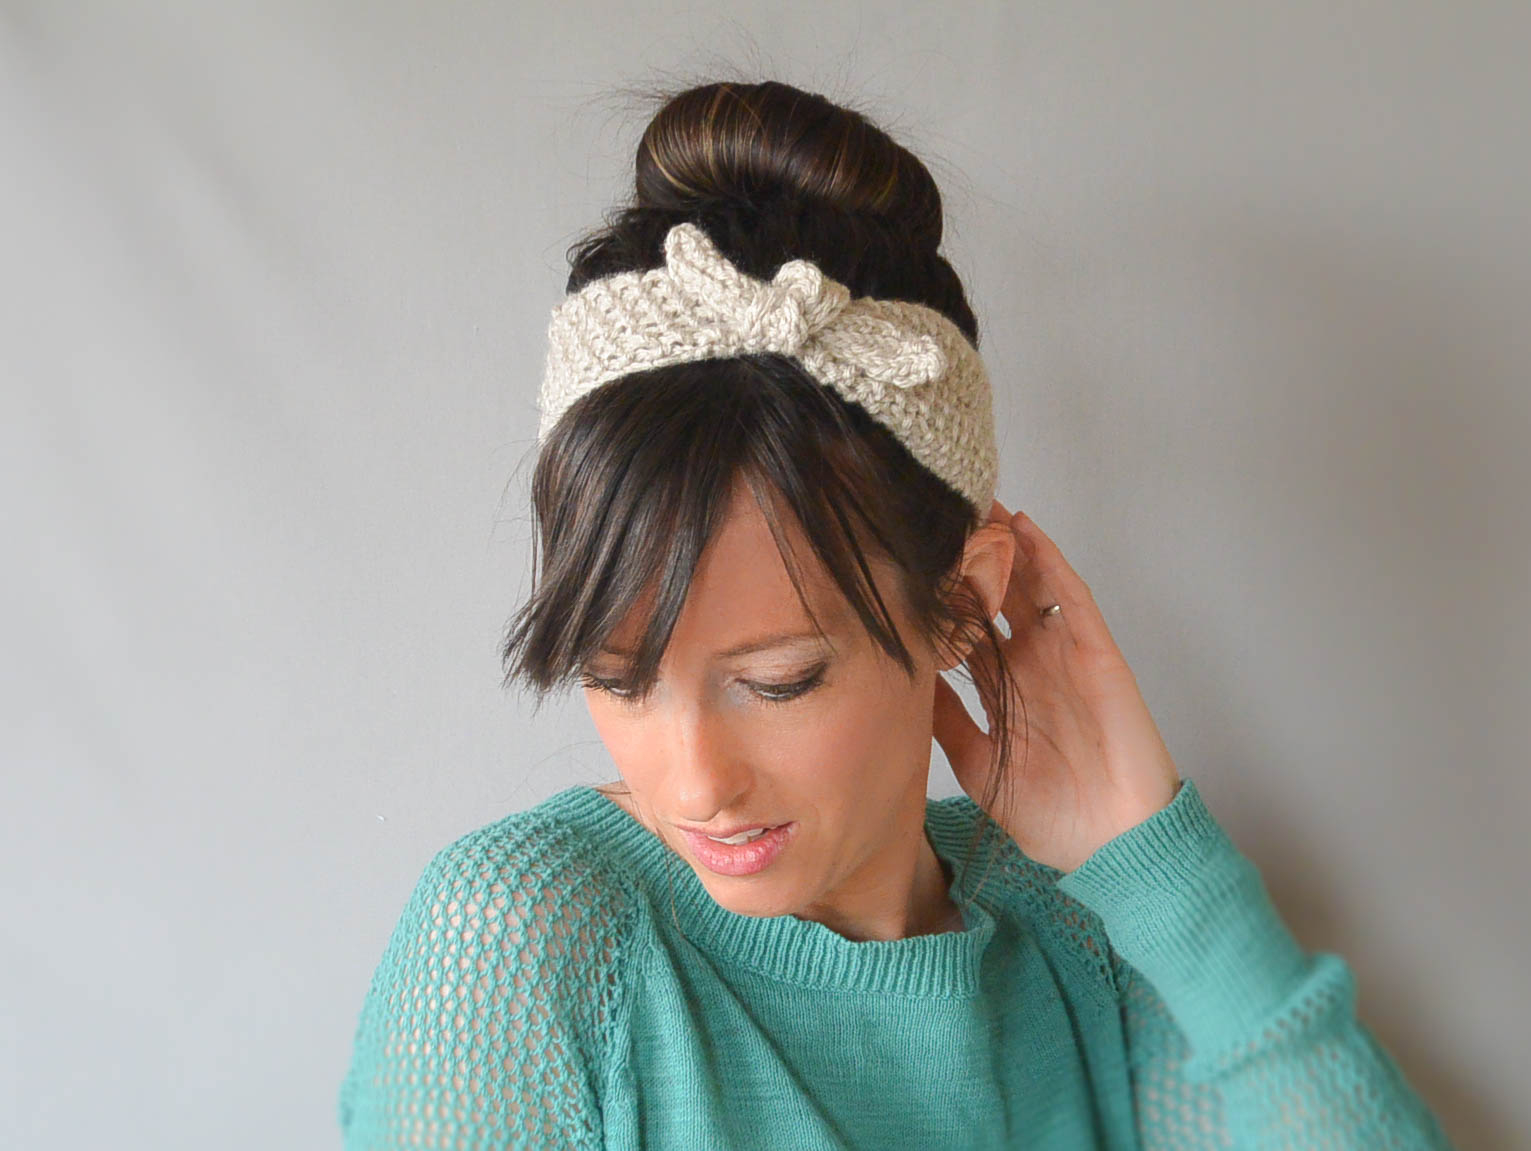 Free Knitting Patterns For Headbands Knit Headband To Style Your Hair Crochet And Knitting Patterns 2019